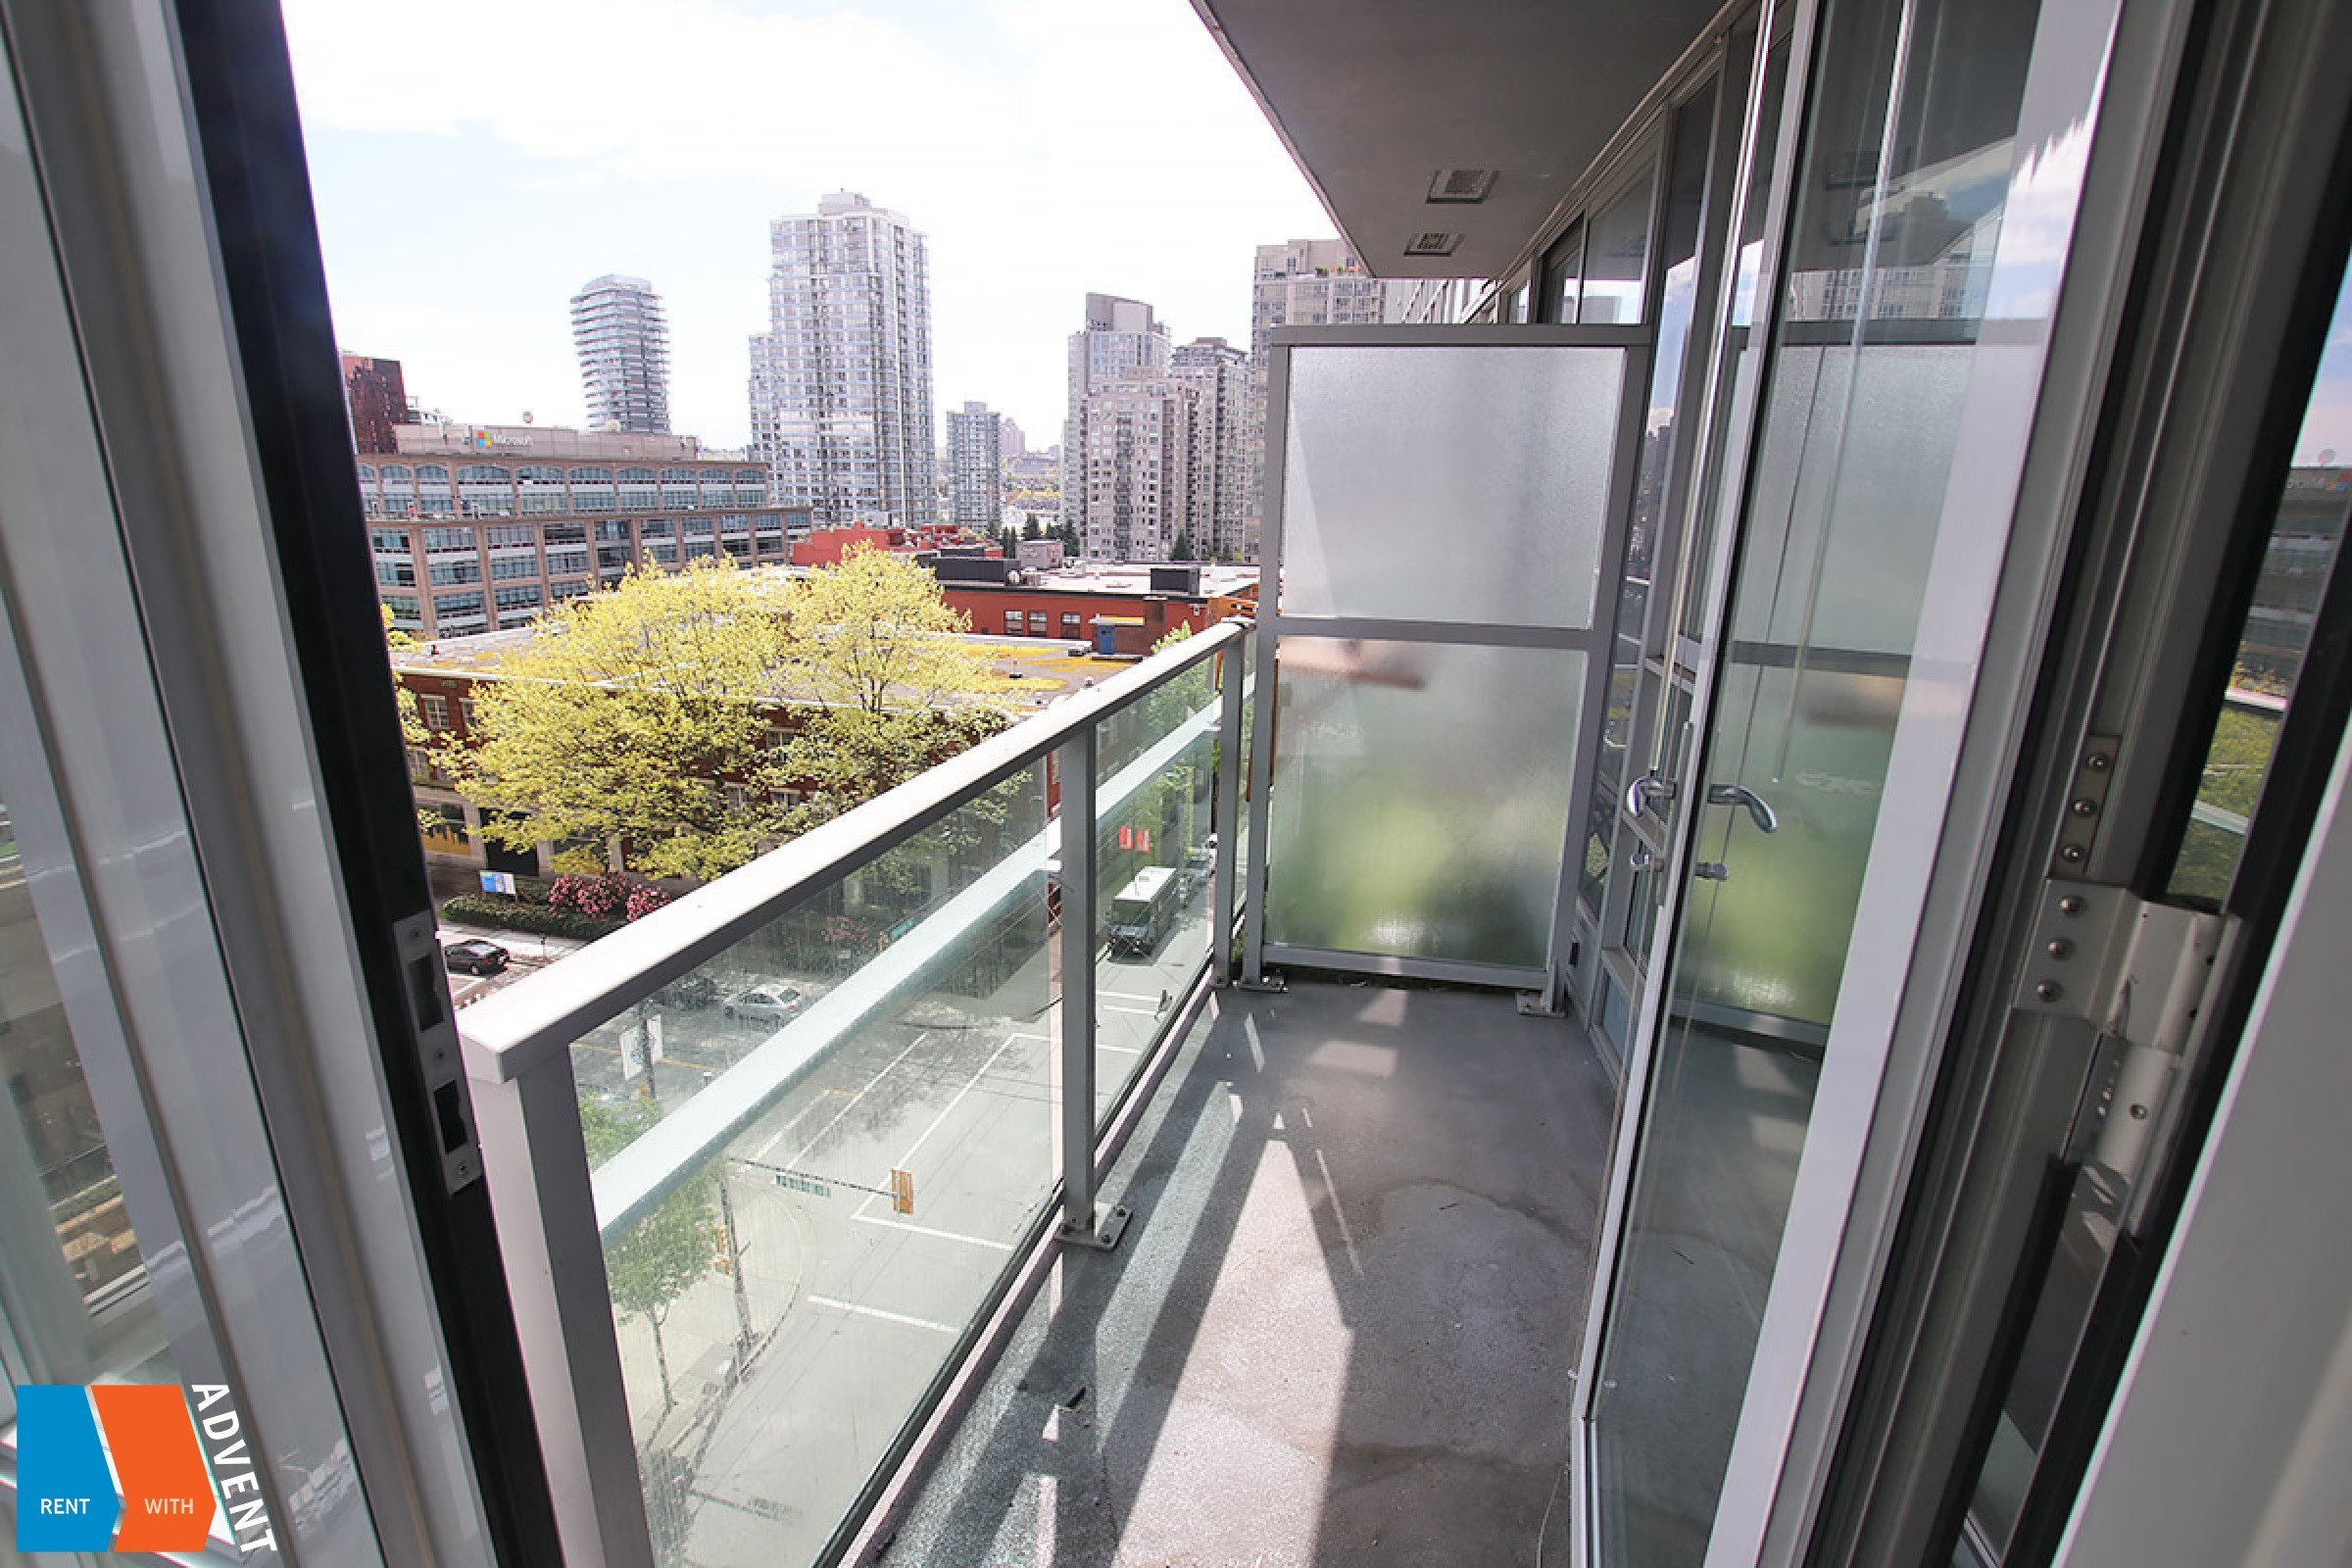 1 Bedroom & Den Unfurnished Apartment Rental at TV Towers in Downtown Vancouver. 905 - 233 Robson Street, Vancouver, BC, Canada.